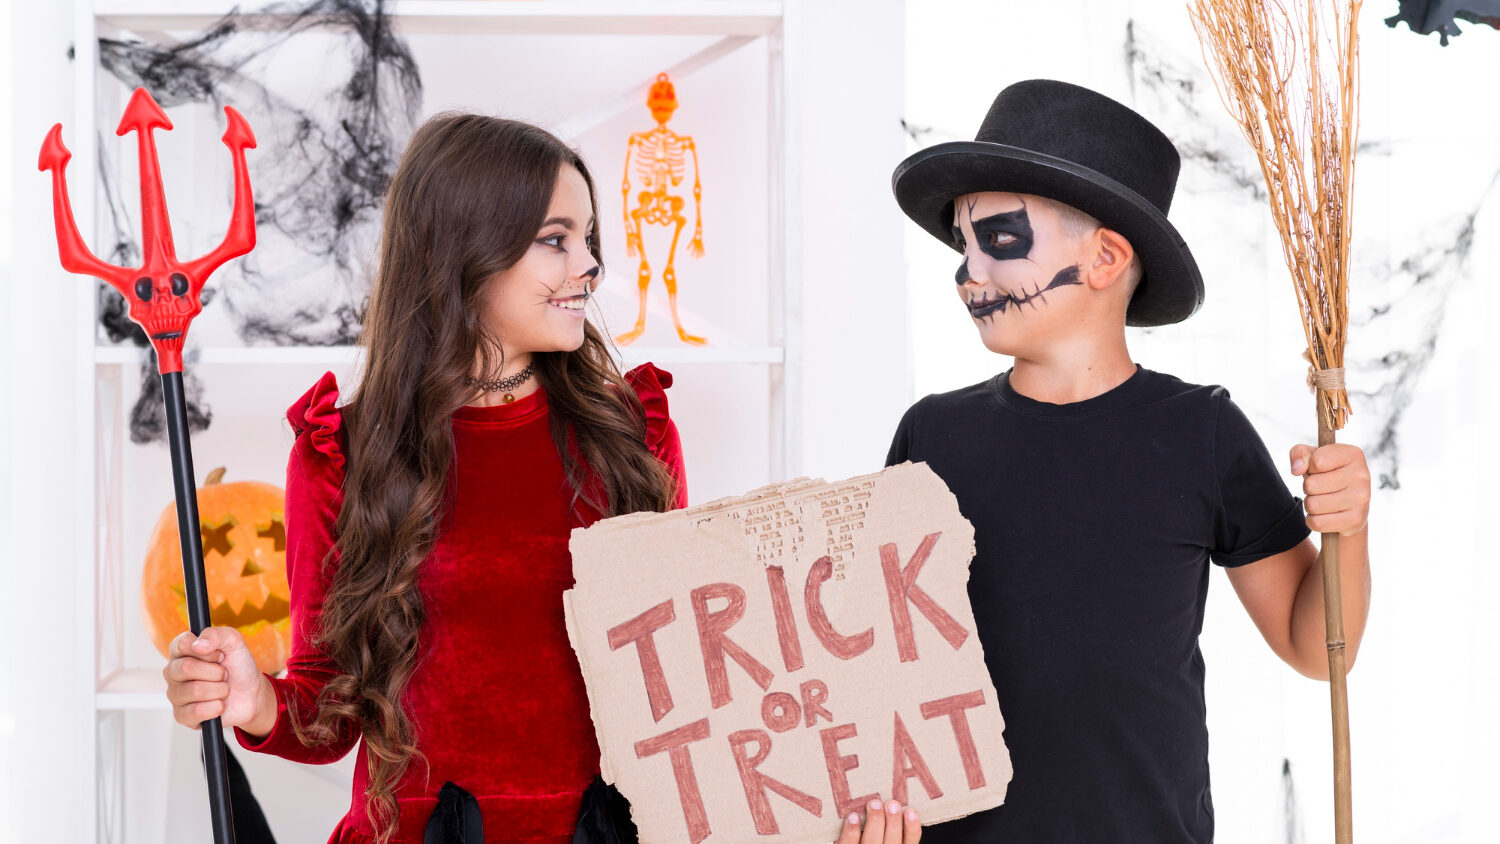 Raise autism awareness during trick-or-treating.